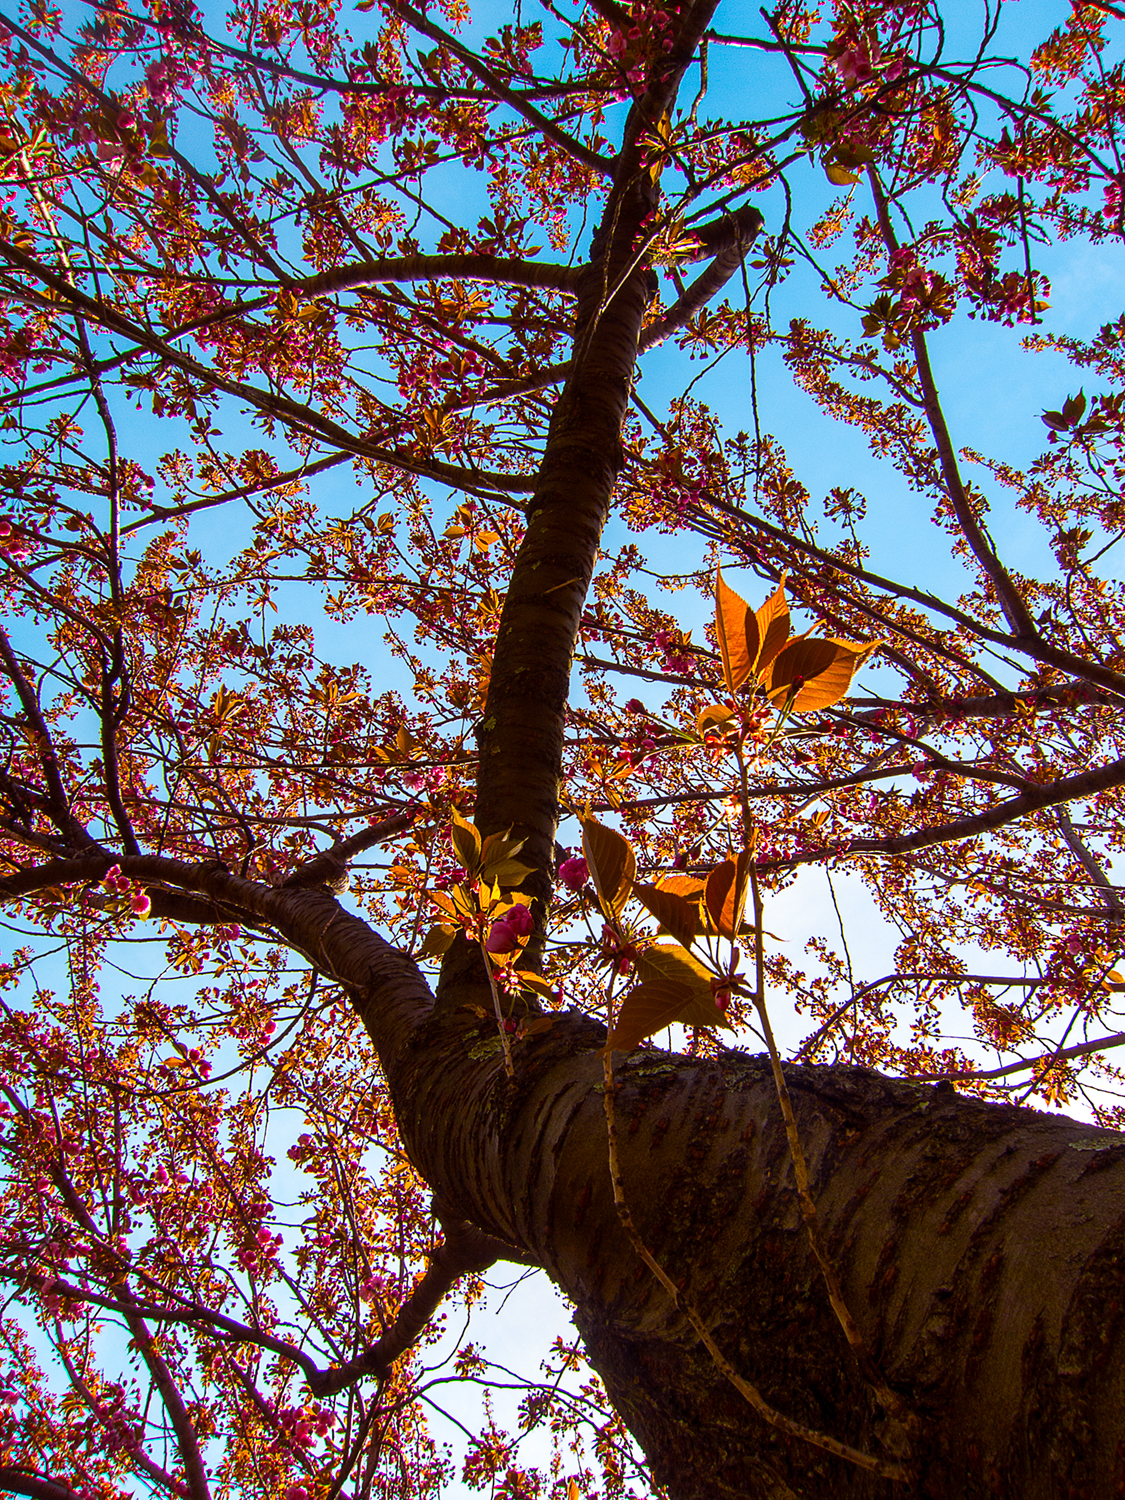 Up a Spring Tree with Red, Yellow, Orange Leaves